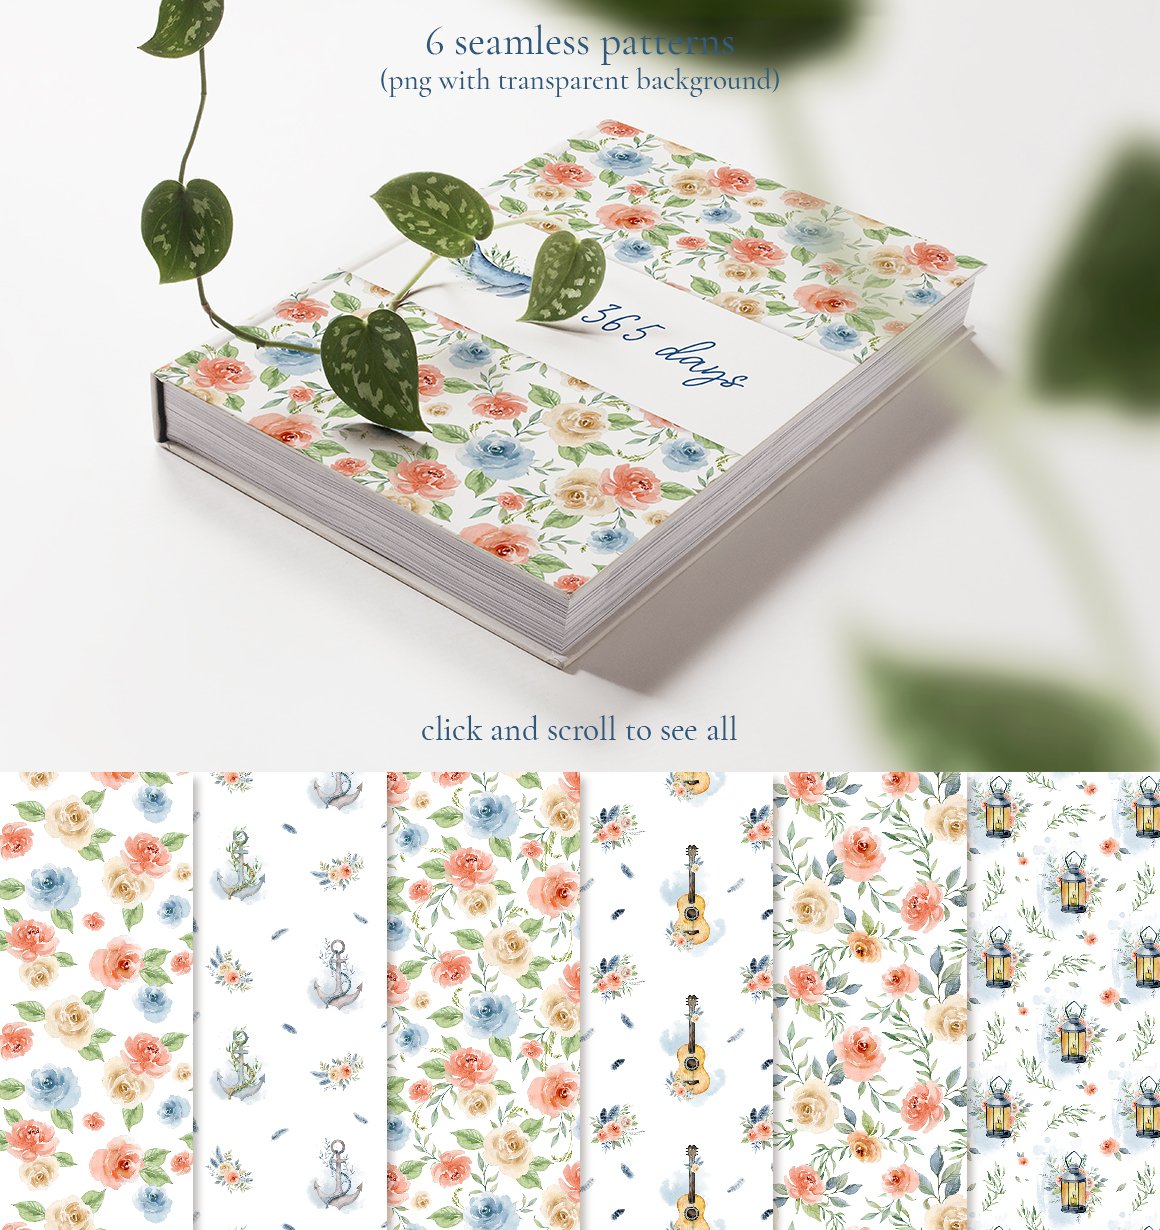 Cover of book with pattern and 6 seamless patterns.